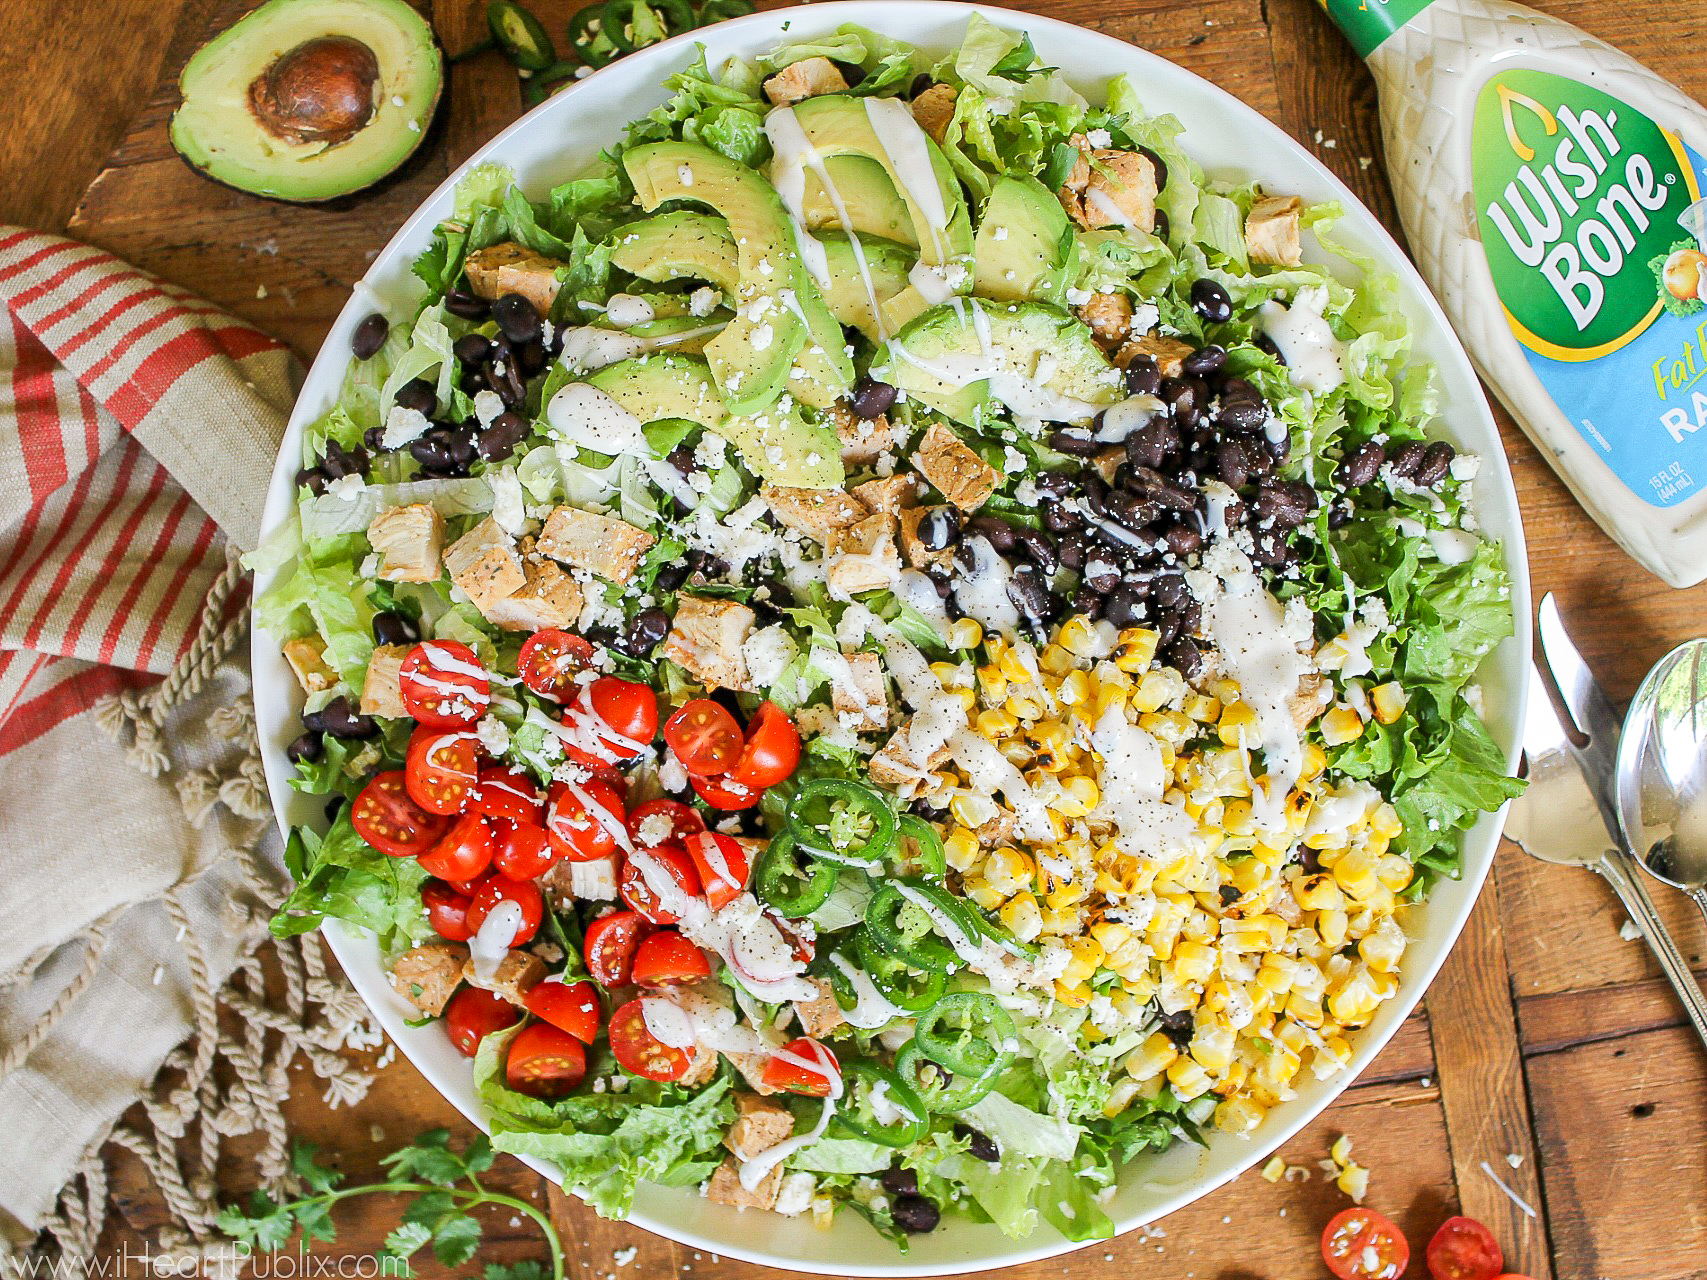 Easy Fiesta Chicken Salad - Delicious Recipe To Go With  The Wish-Bone Dressing Sale At Publix on I Heart Publix